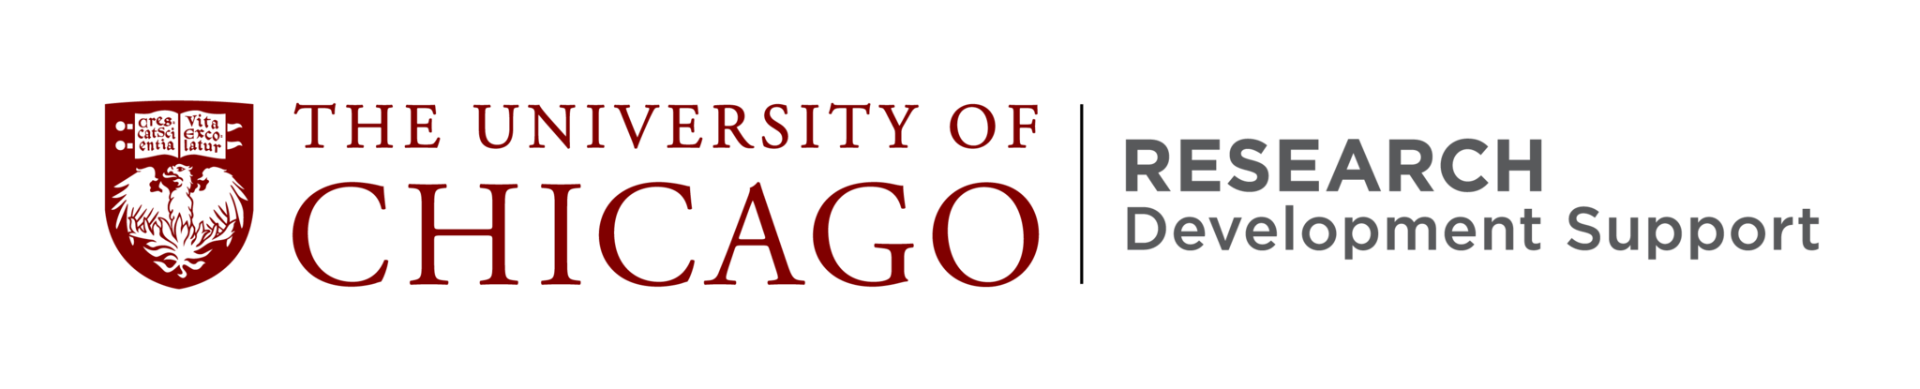 The University of Chicago | Your Signature